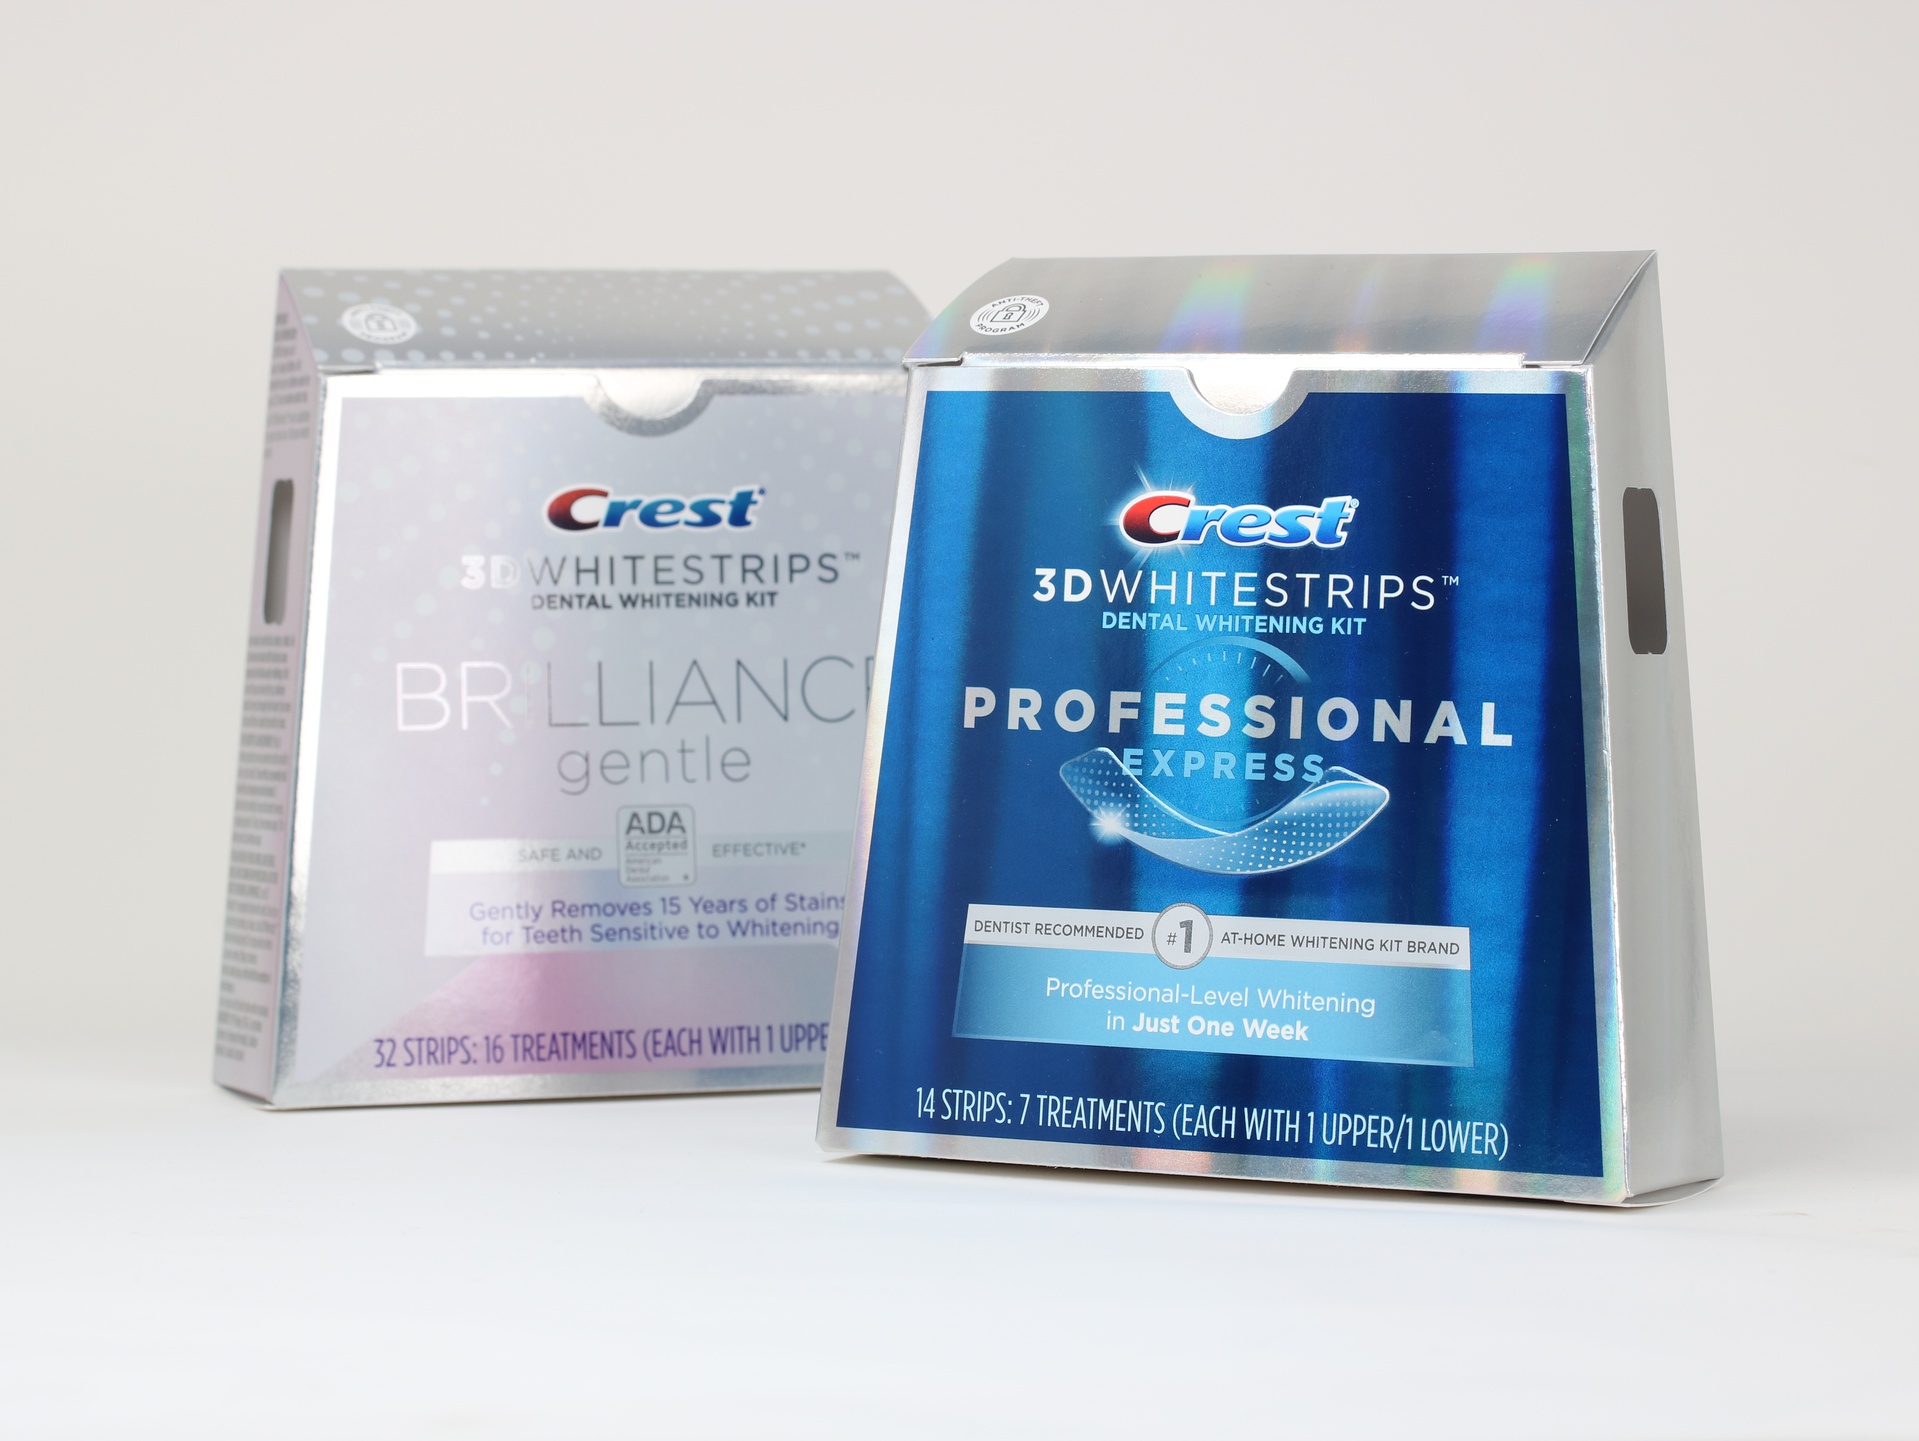 Crest 3D Whitestrips Professional folding cartons feature cold foiling and embossing.